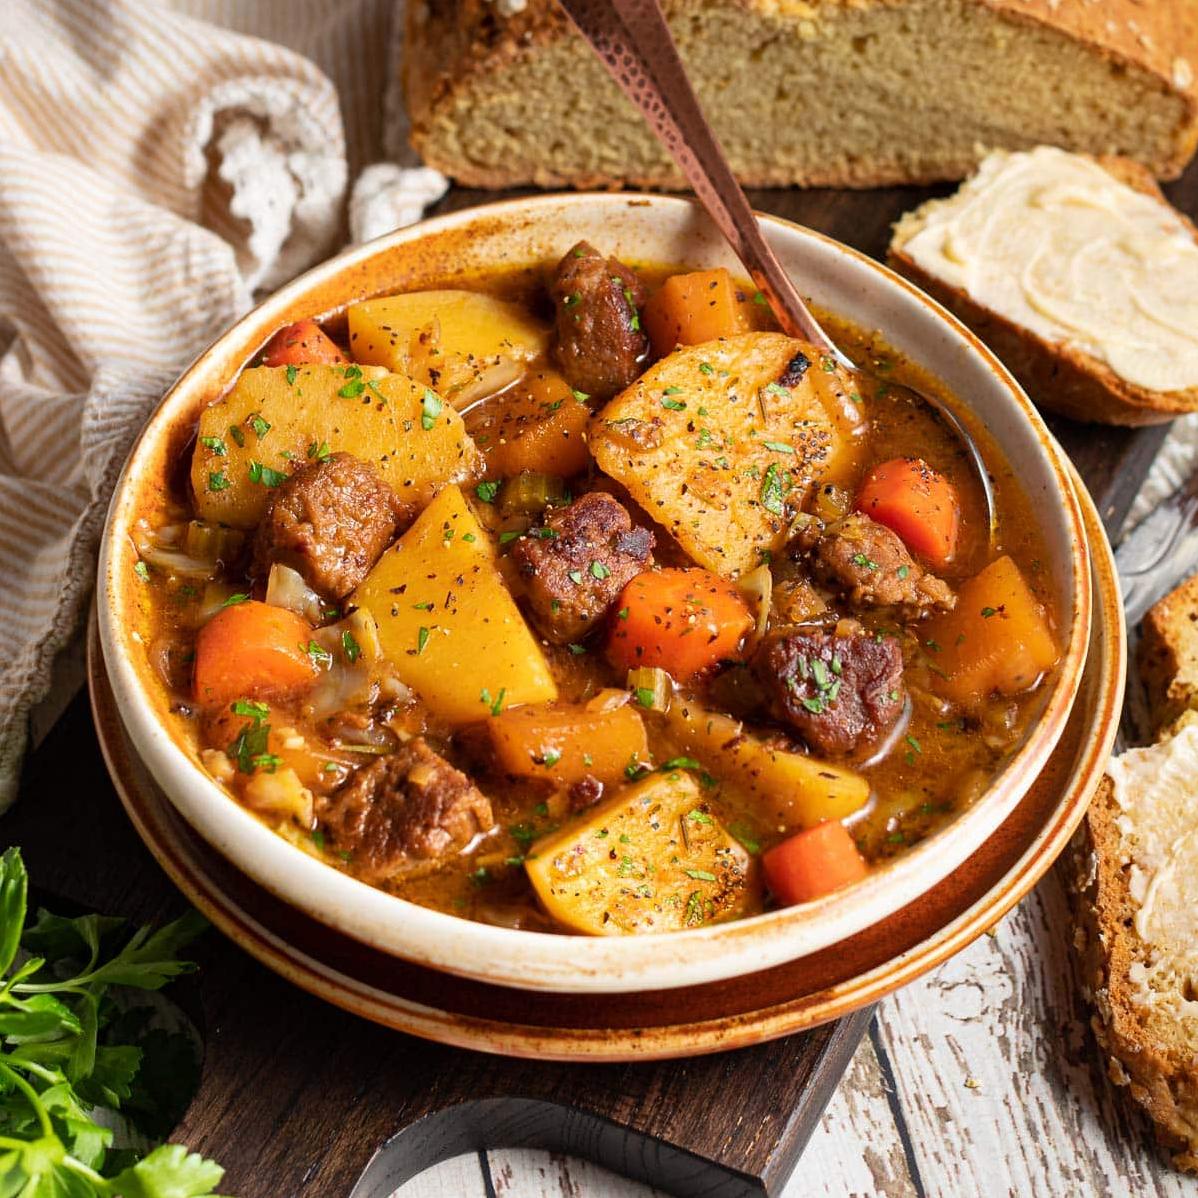  This hearty meatless Irish stew is a must-try for any vegetarian.